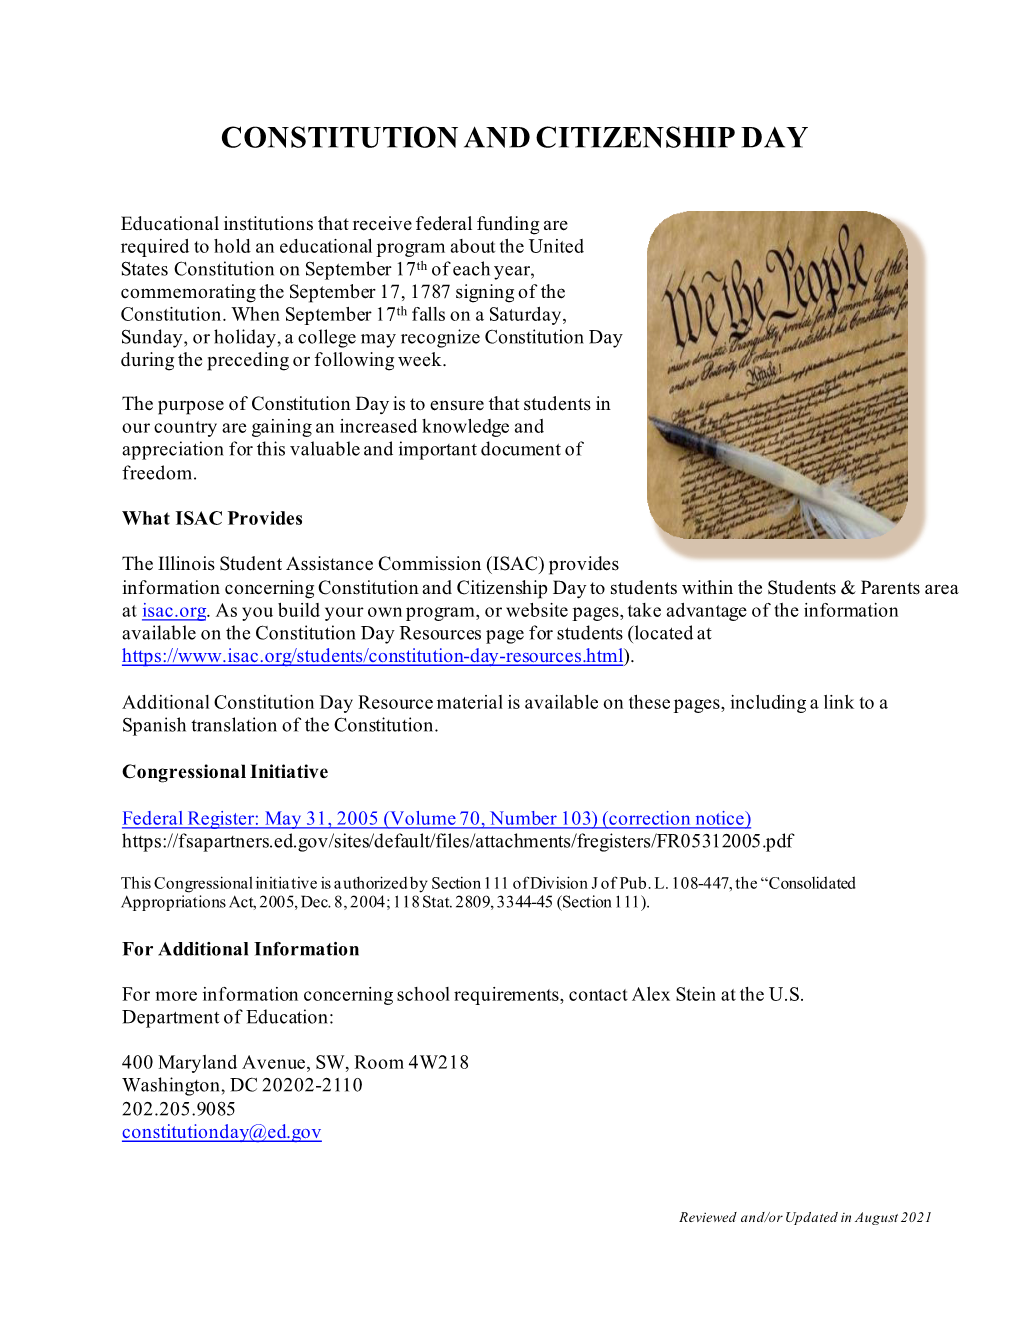 Constitution and Citizenship Day Document